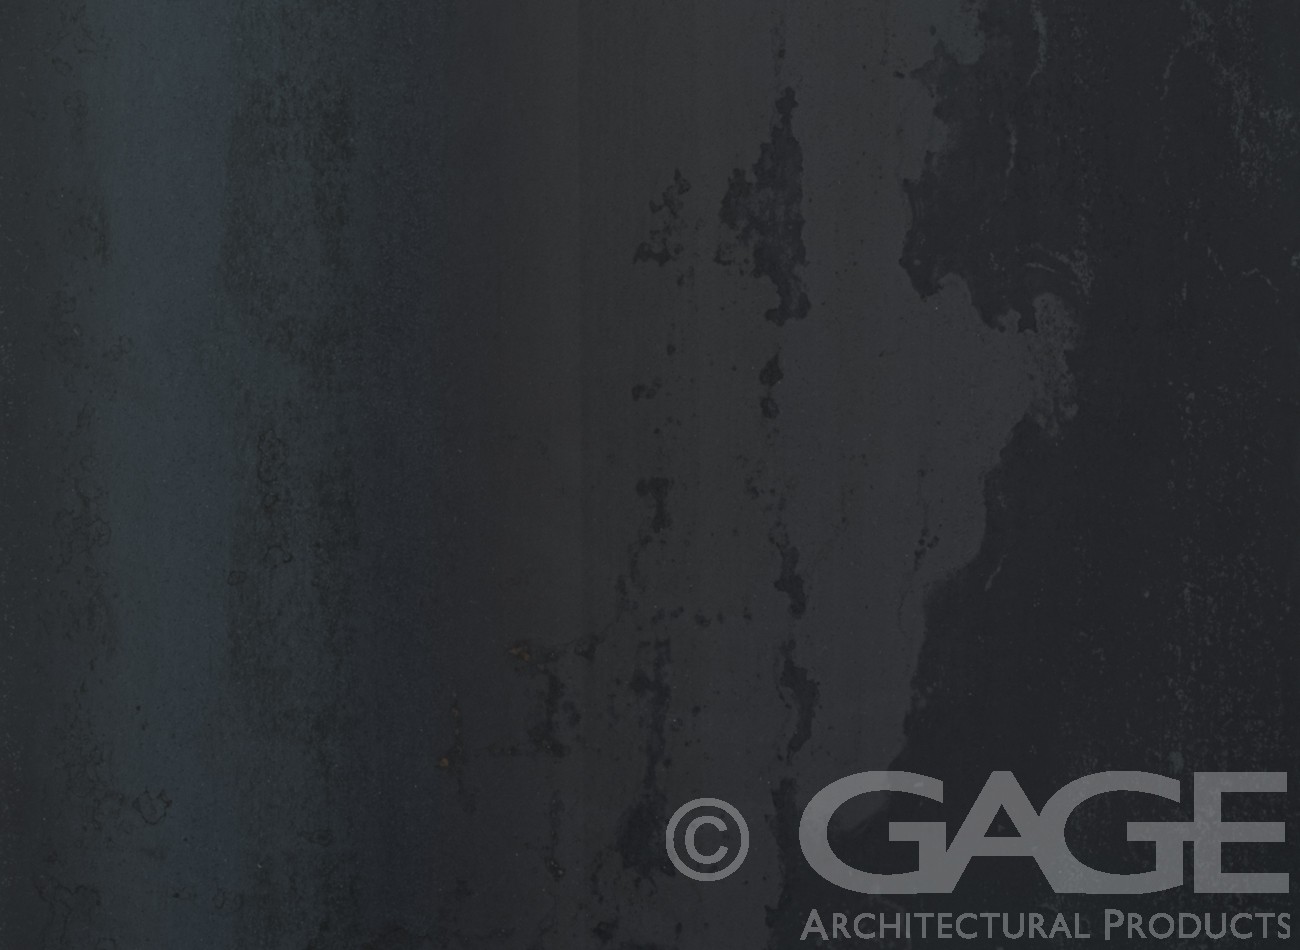 Black Organic | Gage Architectural Products